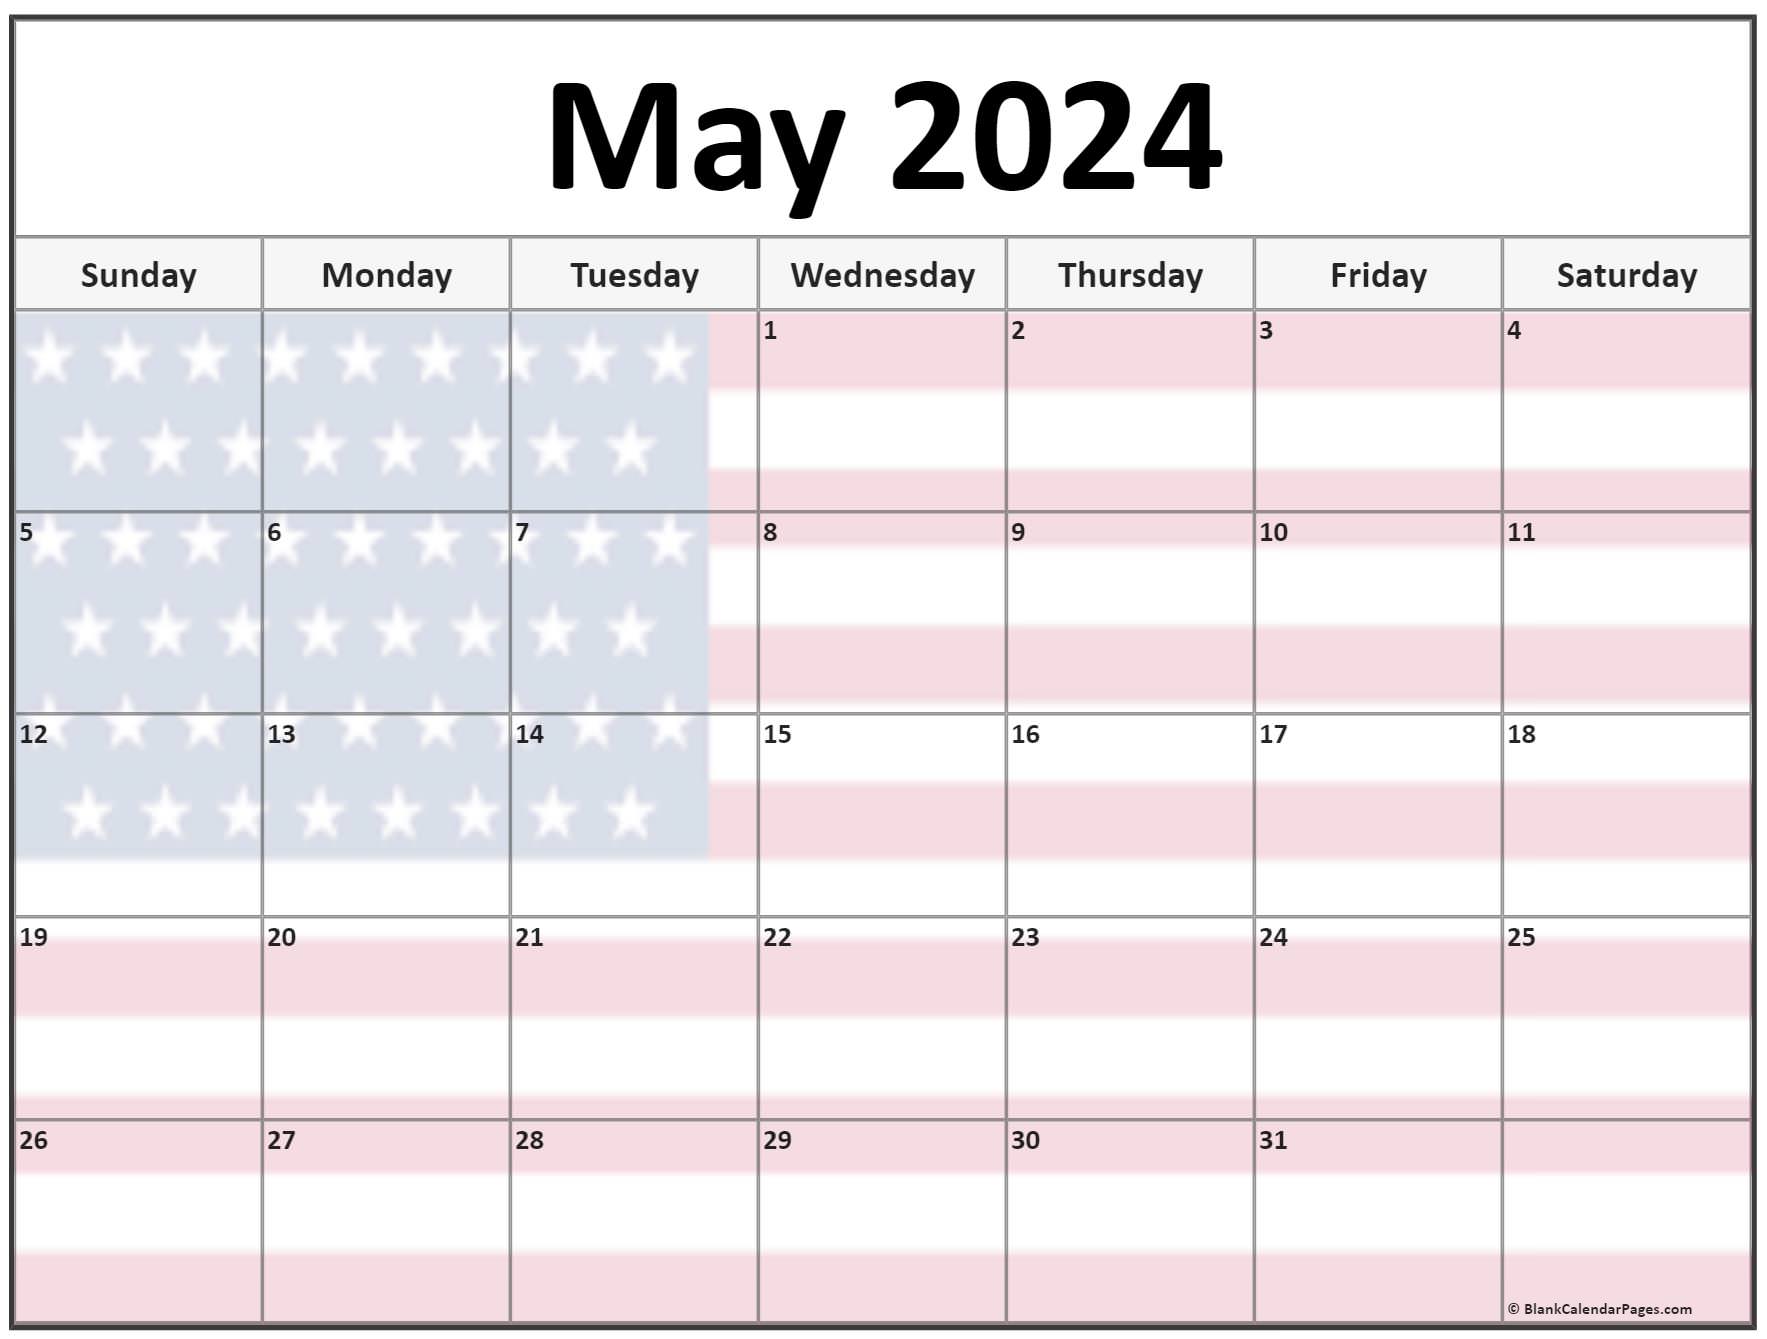 Collection of May 2022 photo calendars with image filters.